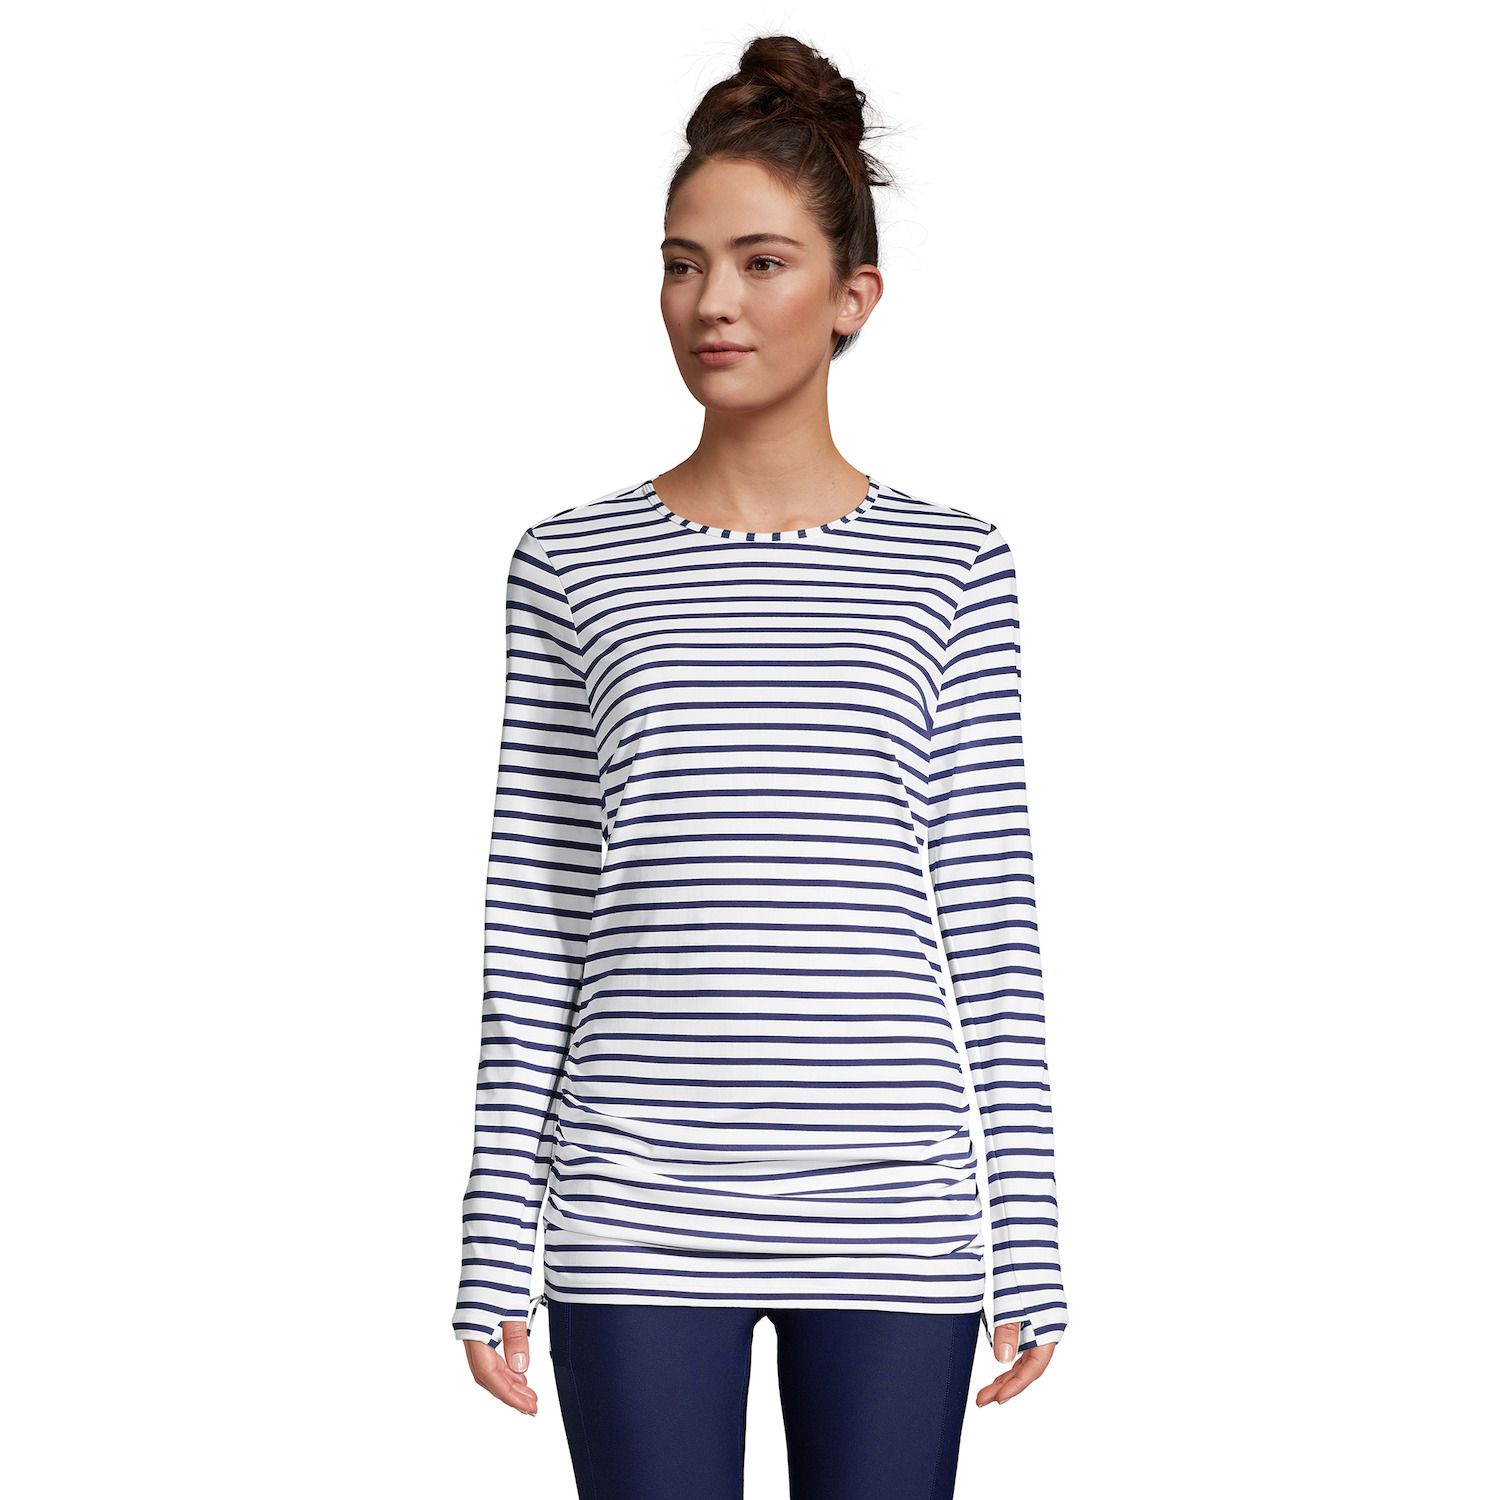 Image for Lands' End Women's UPF 50 Ruched-Side Rash Guard Swim Tunic at Kohl's.